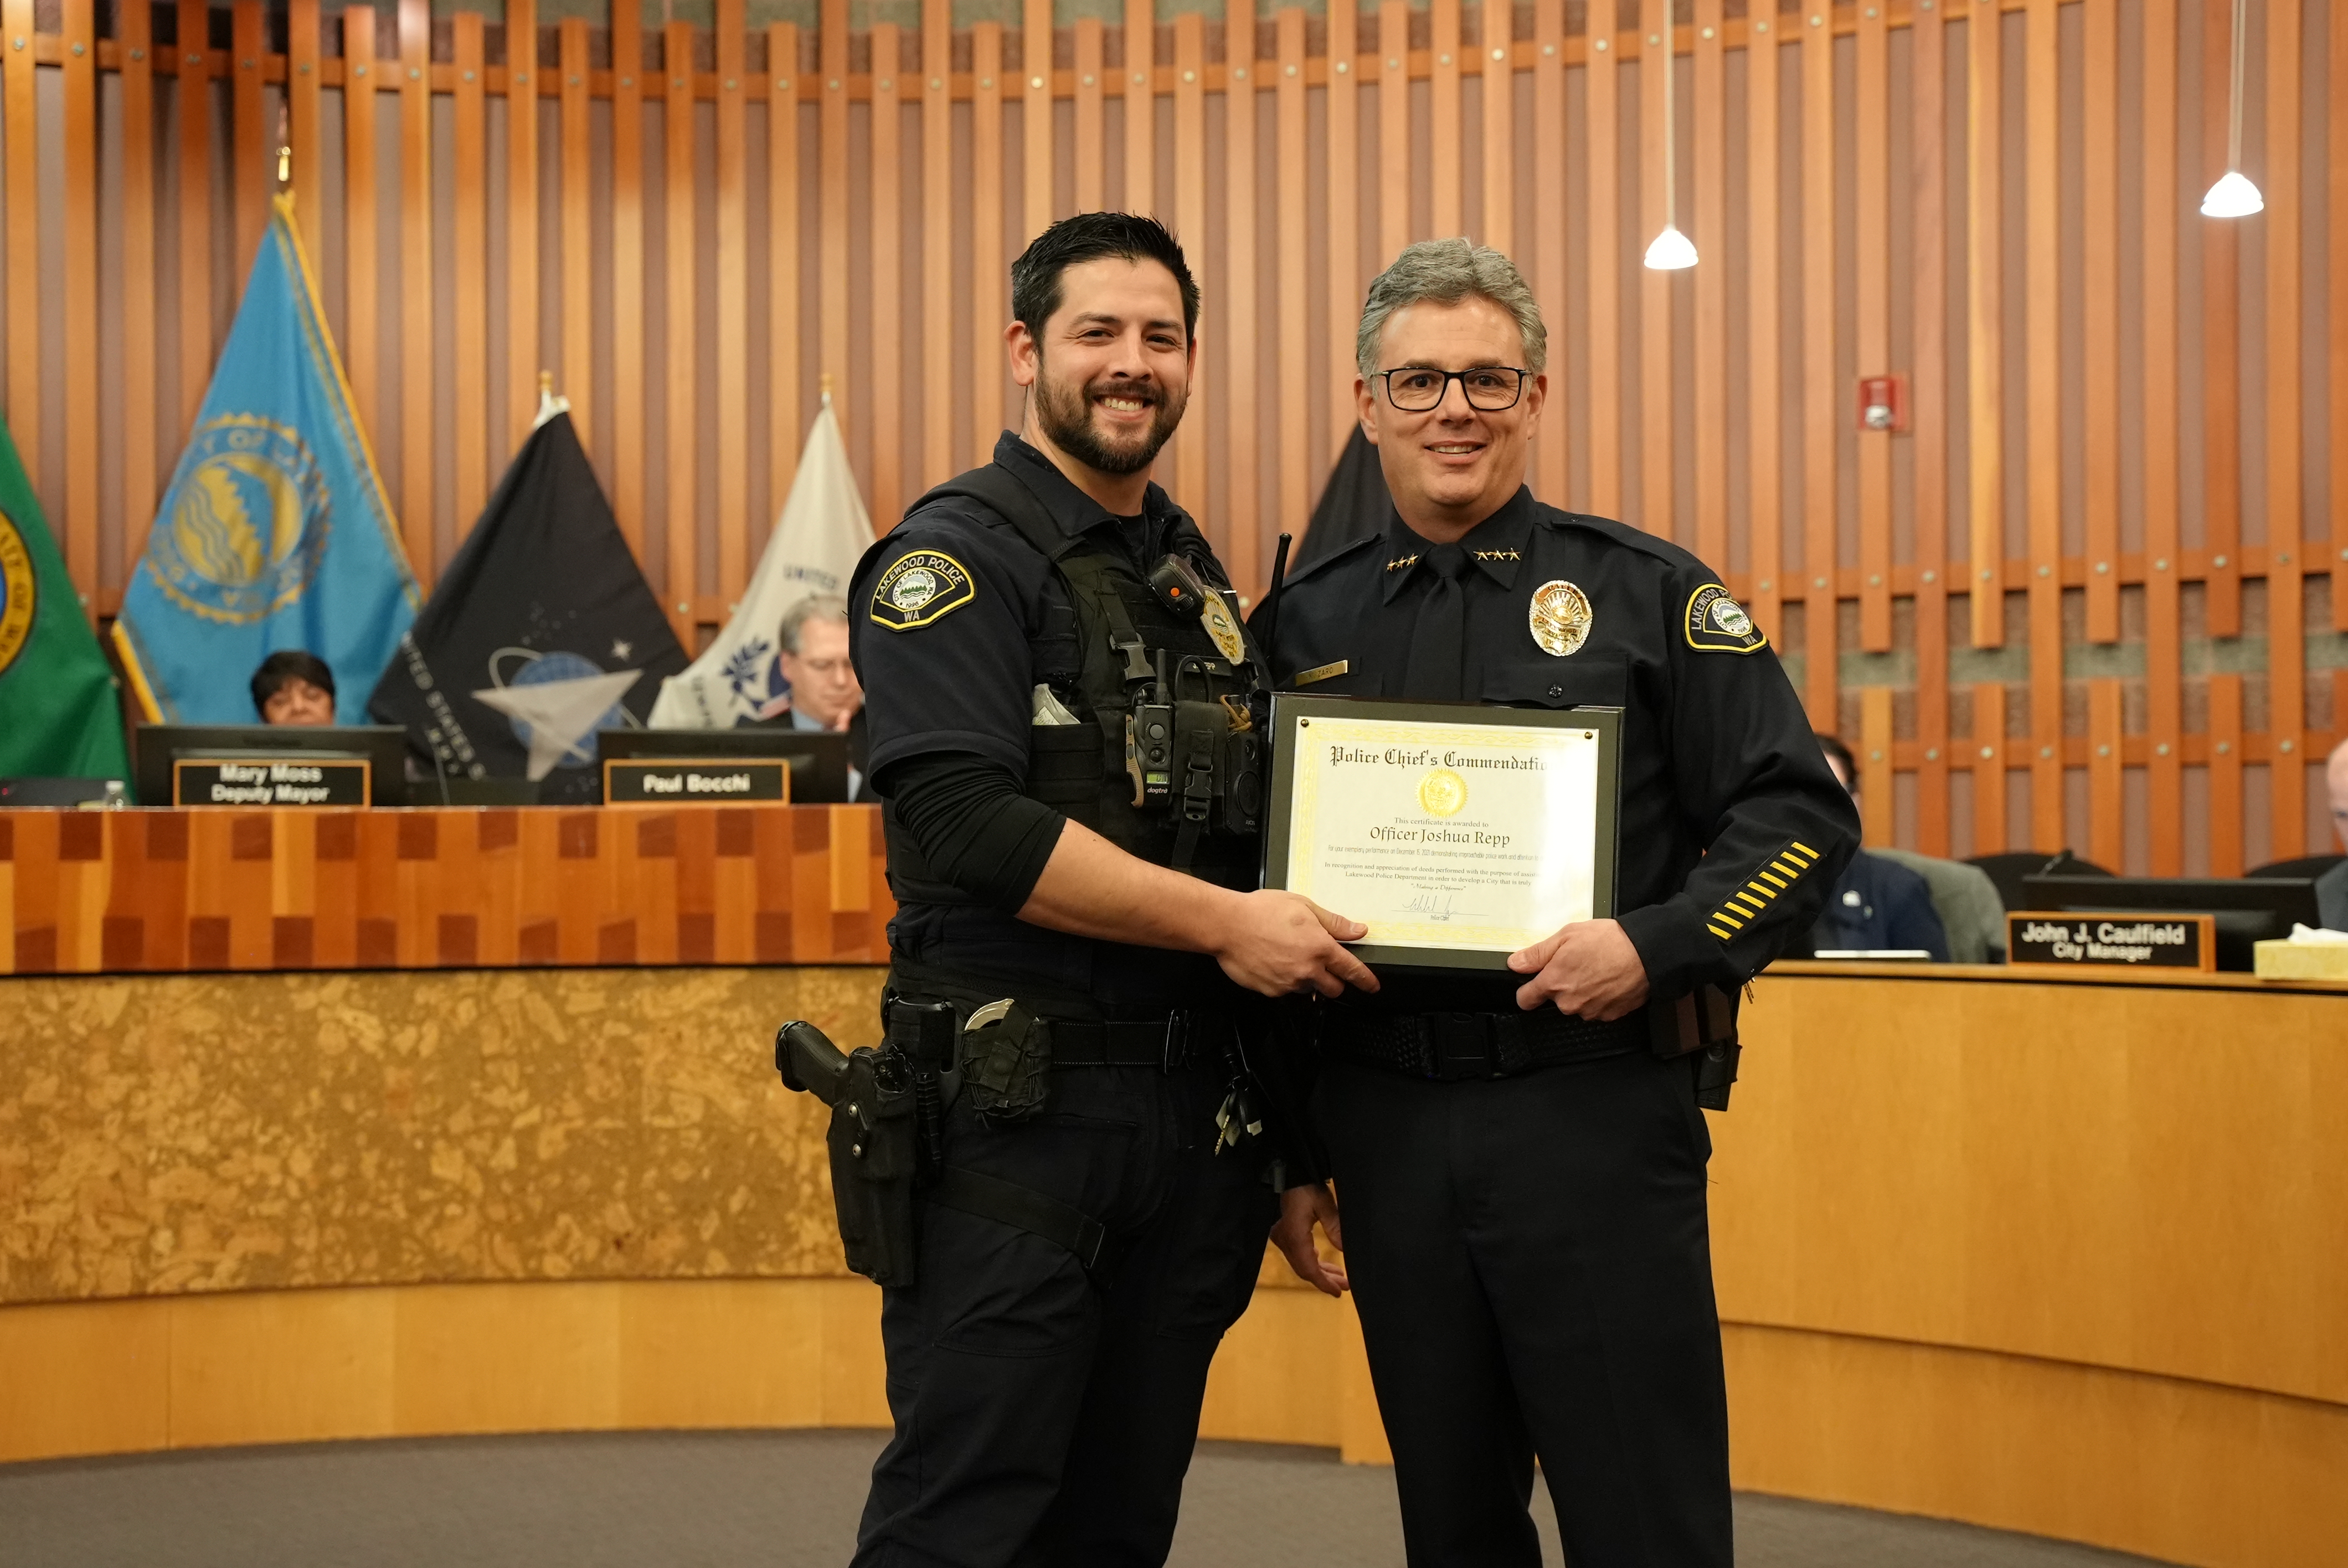 Officer Josh Repp receives a Police Chief Commendation from Chief Zaro.